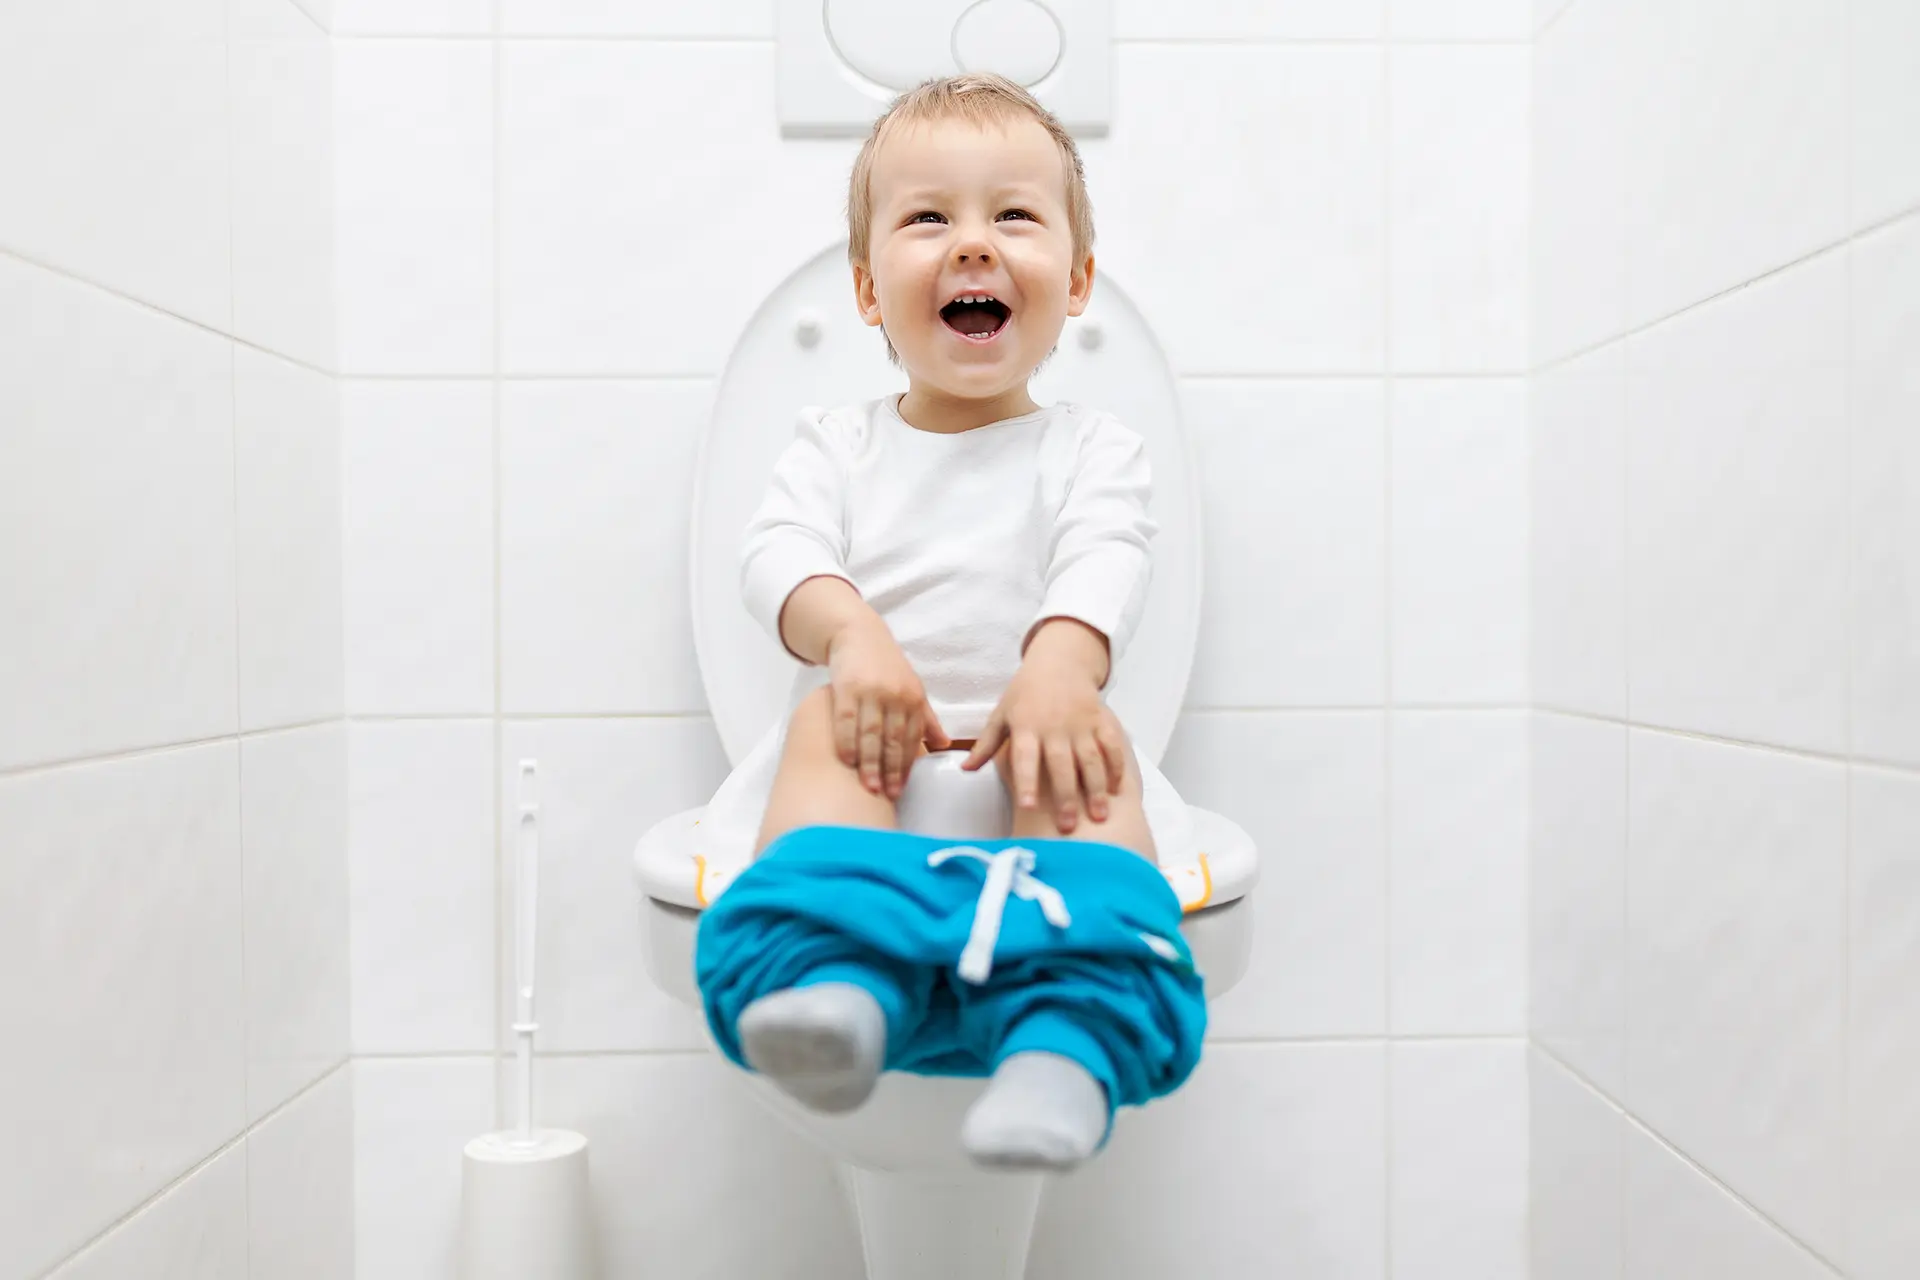 A baby learns potty training using the Montessori method.